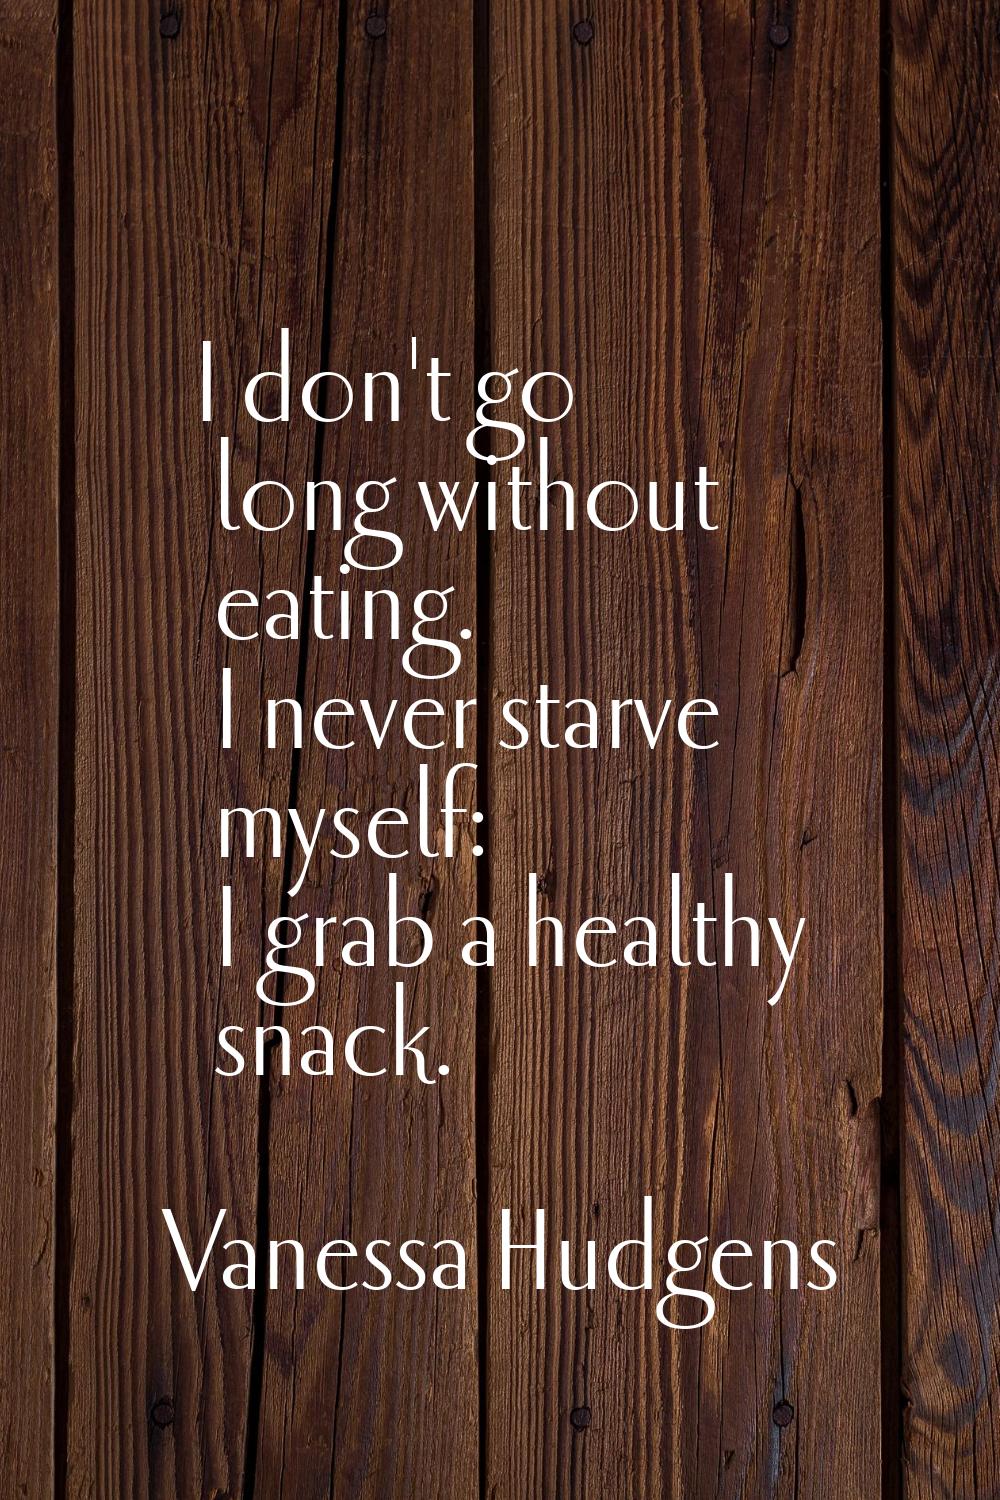 I don't go long without eating. I never starve myself: I grab a healthy snack.